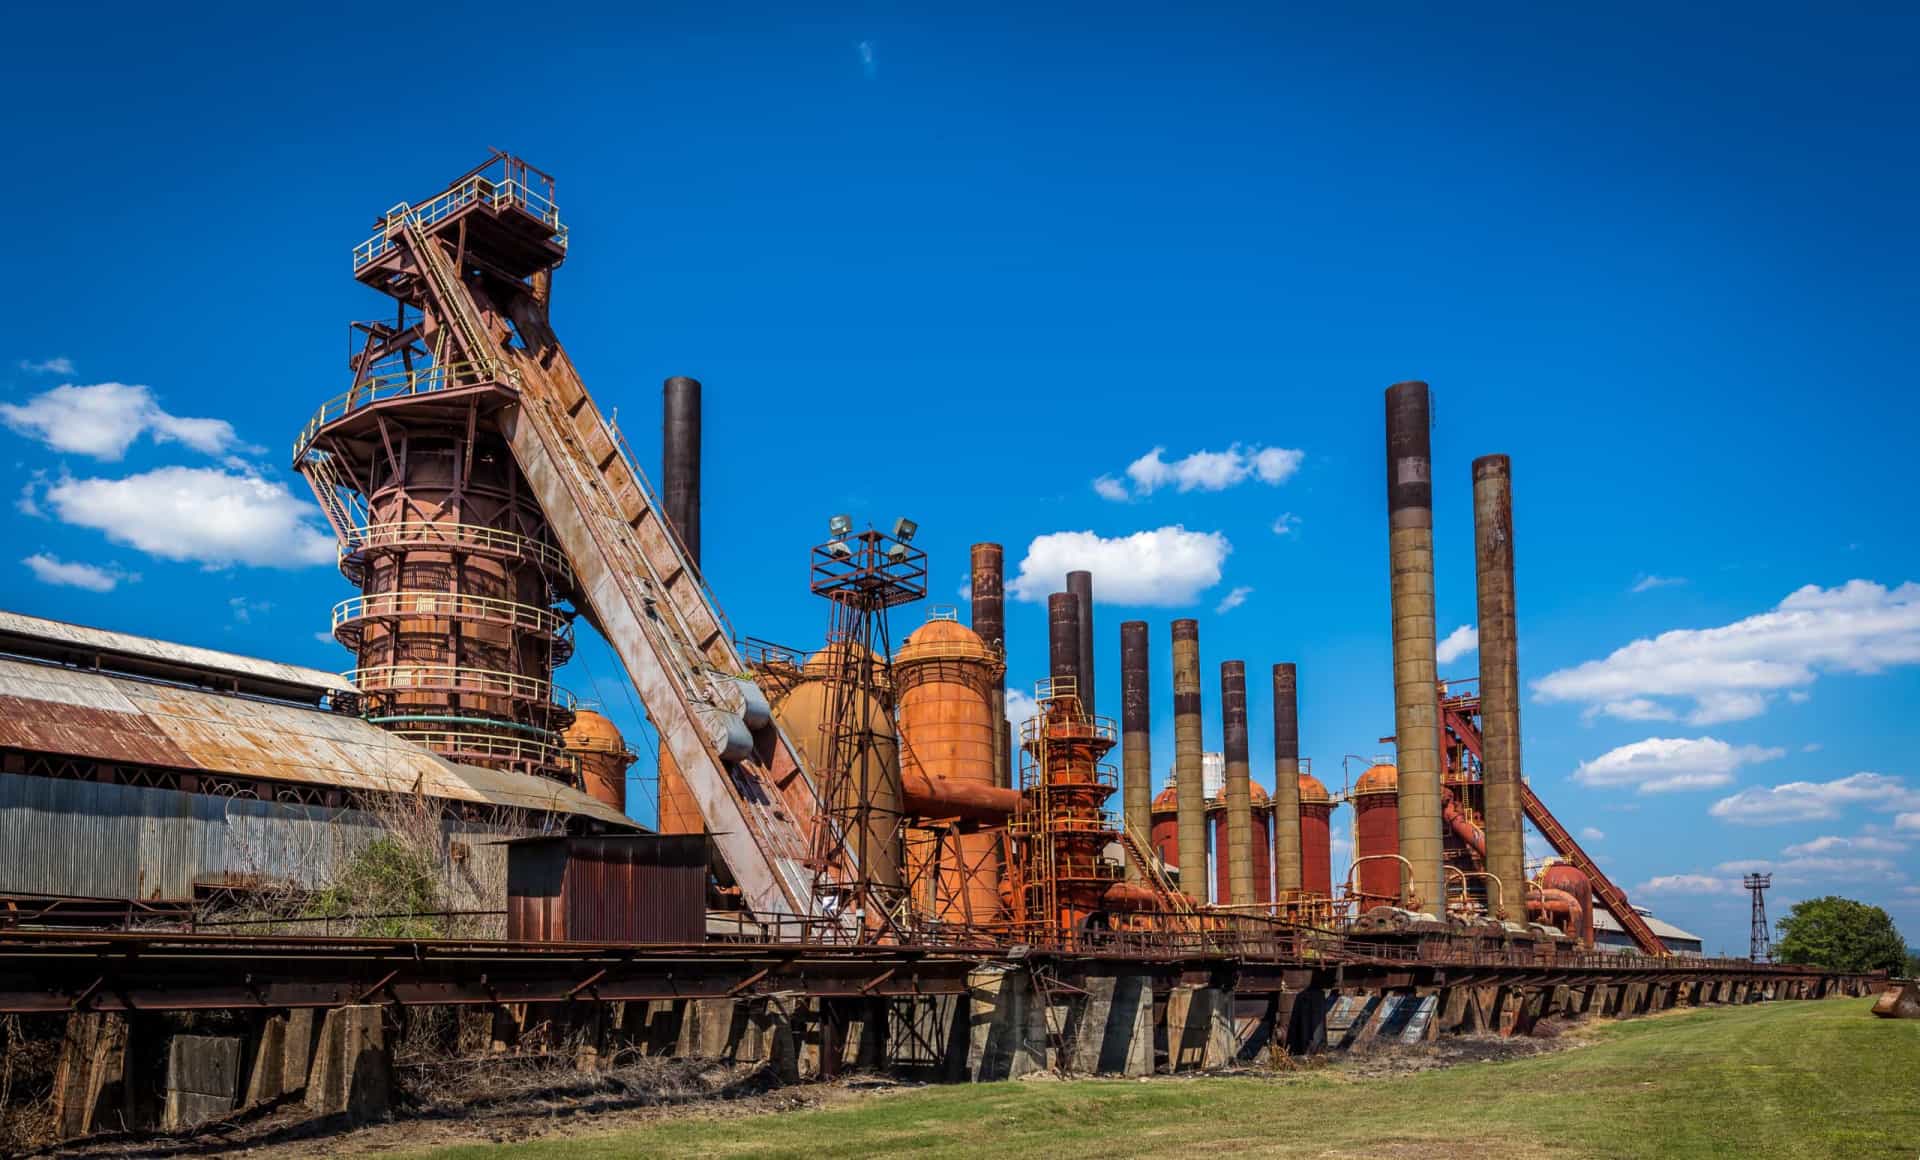 <p>Sloss Furnaces in Birmingham produced steel from the 1880s until the 1970s. Legend has it that a foreman named James "Slag" Wormwood was responsible for the death of 47 workers. Slag eventually fell (or was pushed?) into the largest furnace and died. Over 100 reports of paranormal activity have been made ever since. </p>